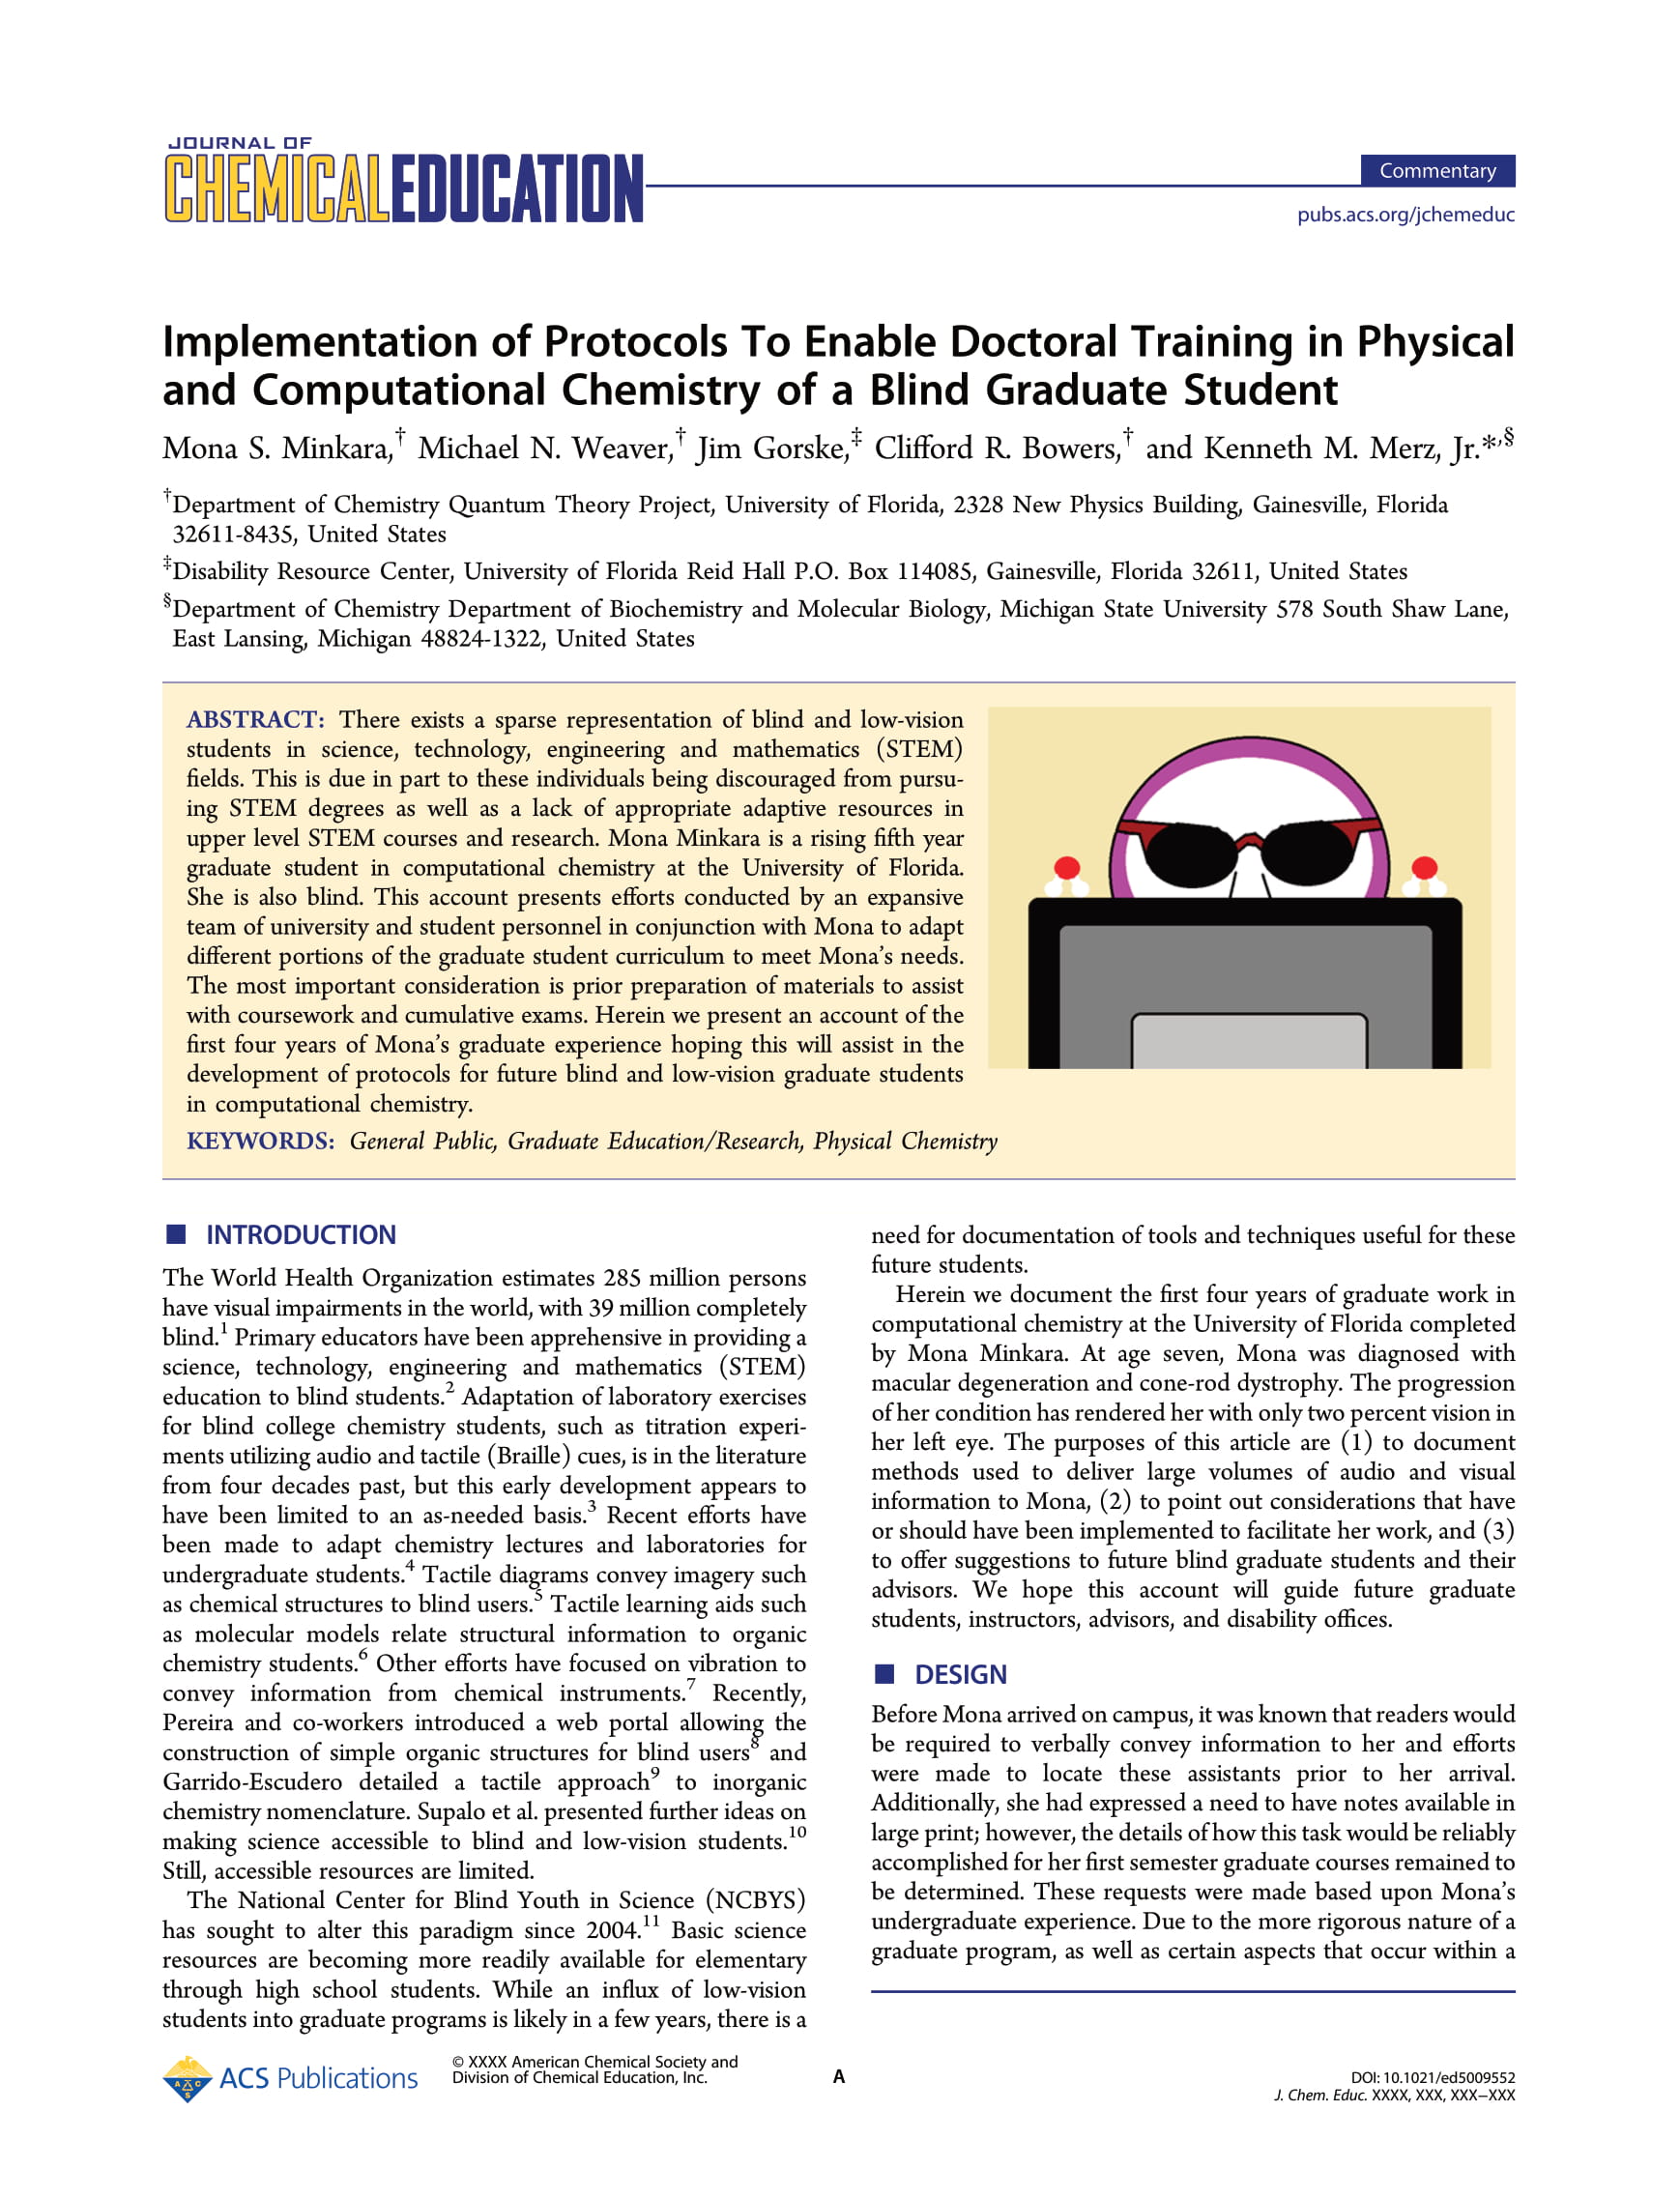 Implementation of Protocols to Enable Doctoral Training in Physical and Computational Chemistry of a Blind Graduate Student